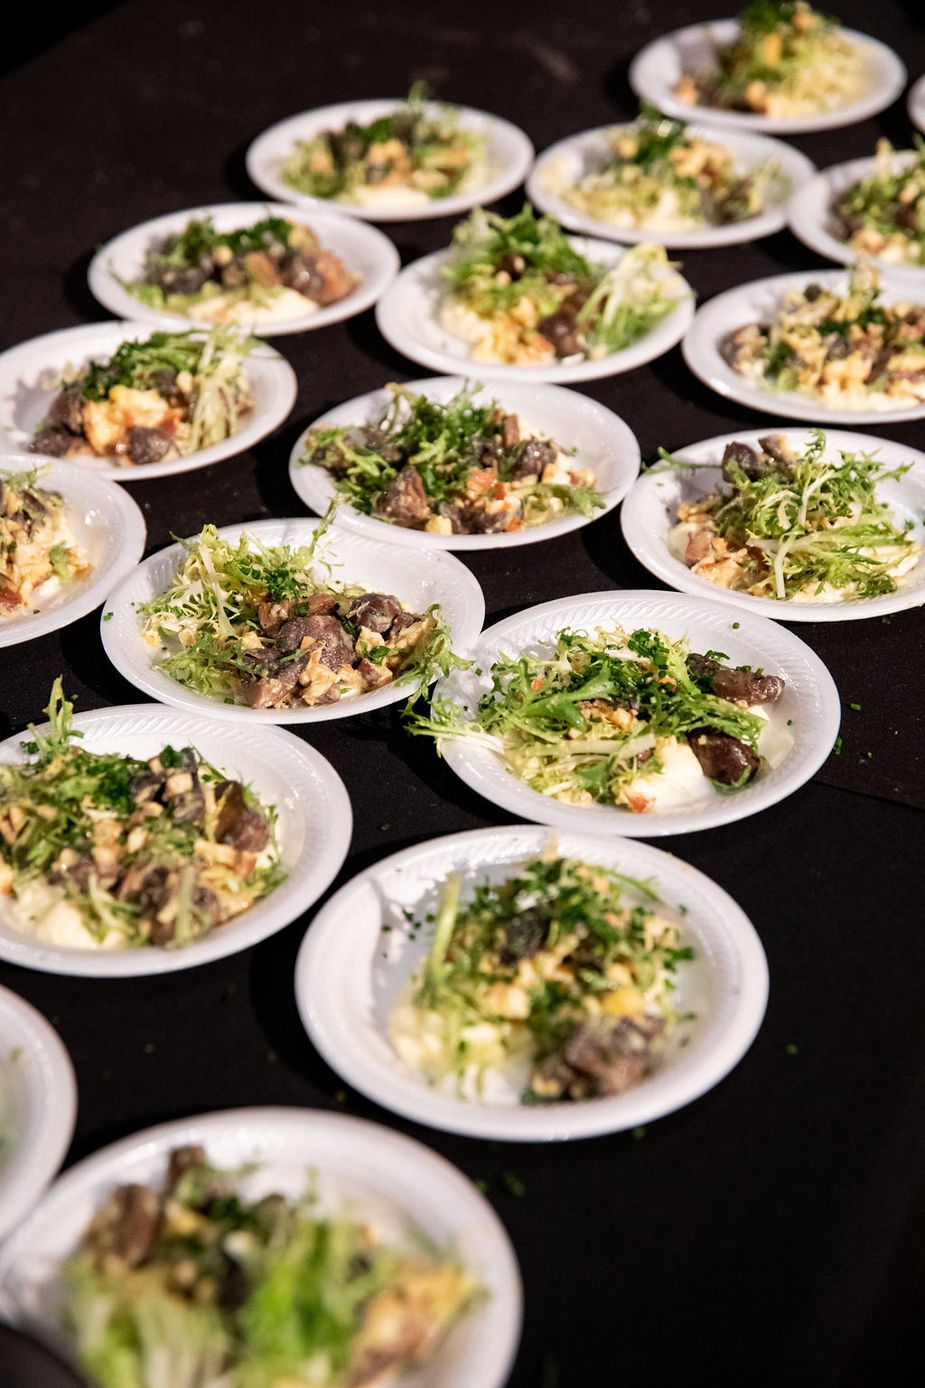 Plates of tasty eggs at the 2020 Omelette Party at the Oklahoma City Museum of Art. This year's event is fully virtual. Photo courtesy OKCMOA